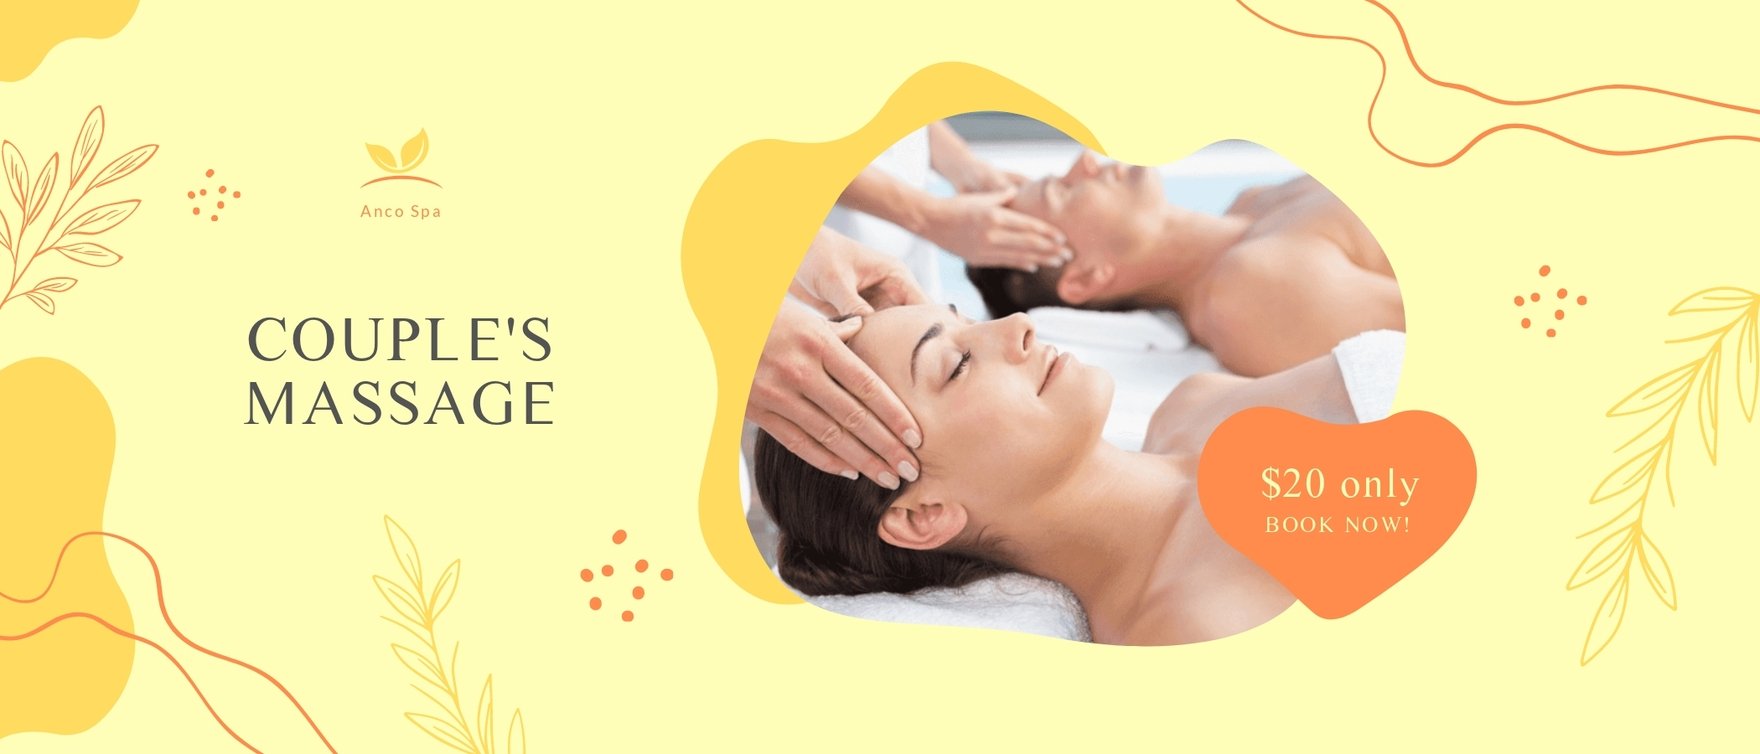 Free Couples Massage Promotion Banner Template